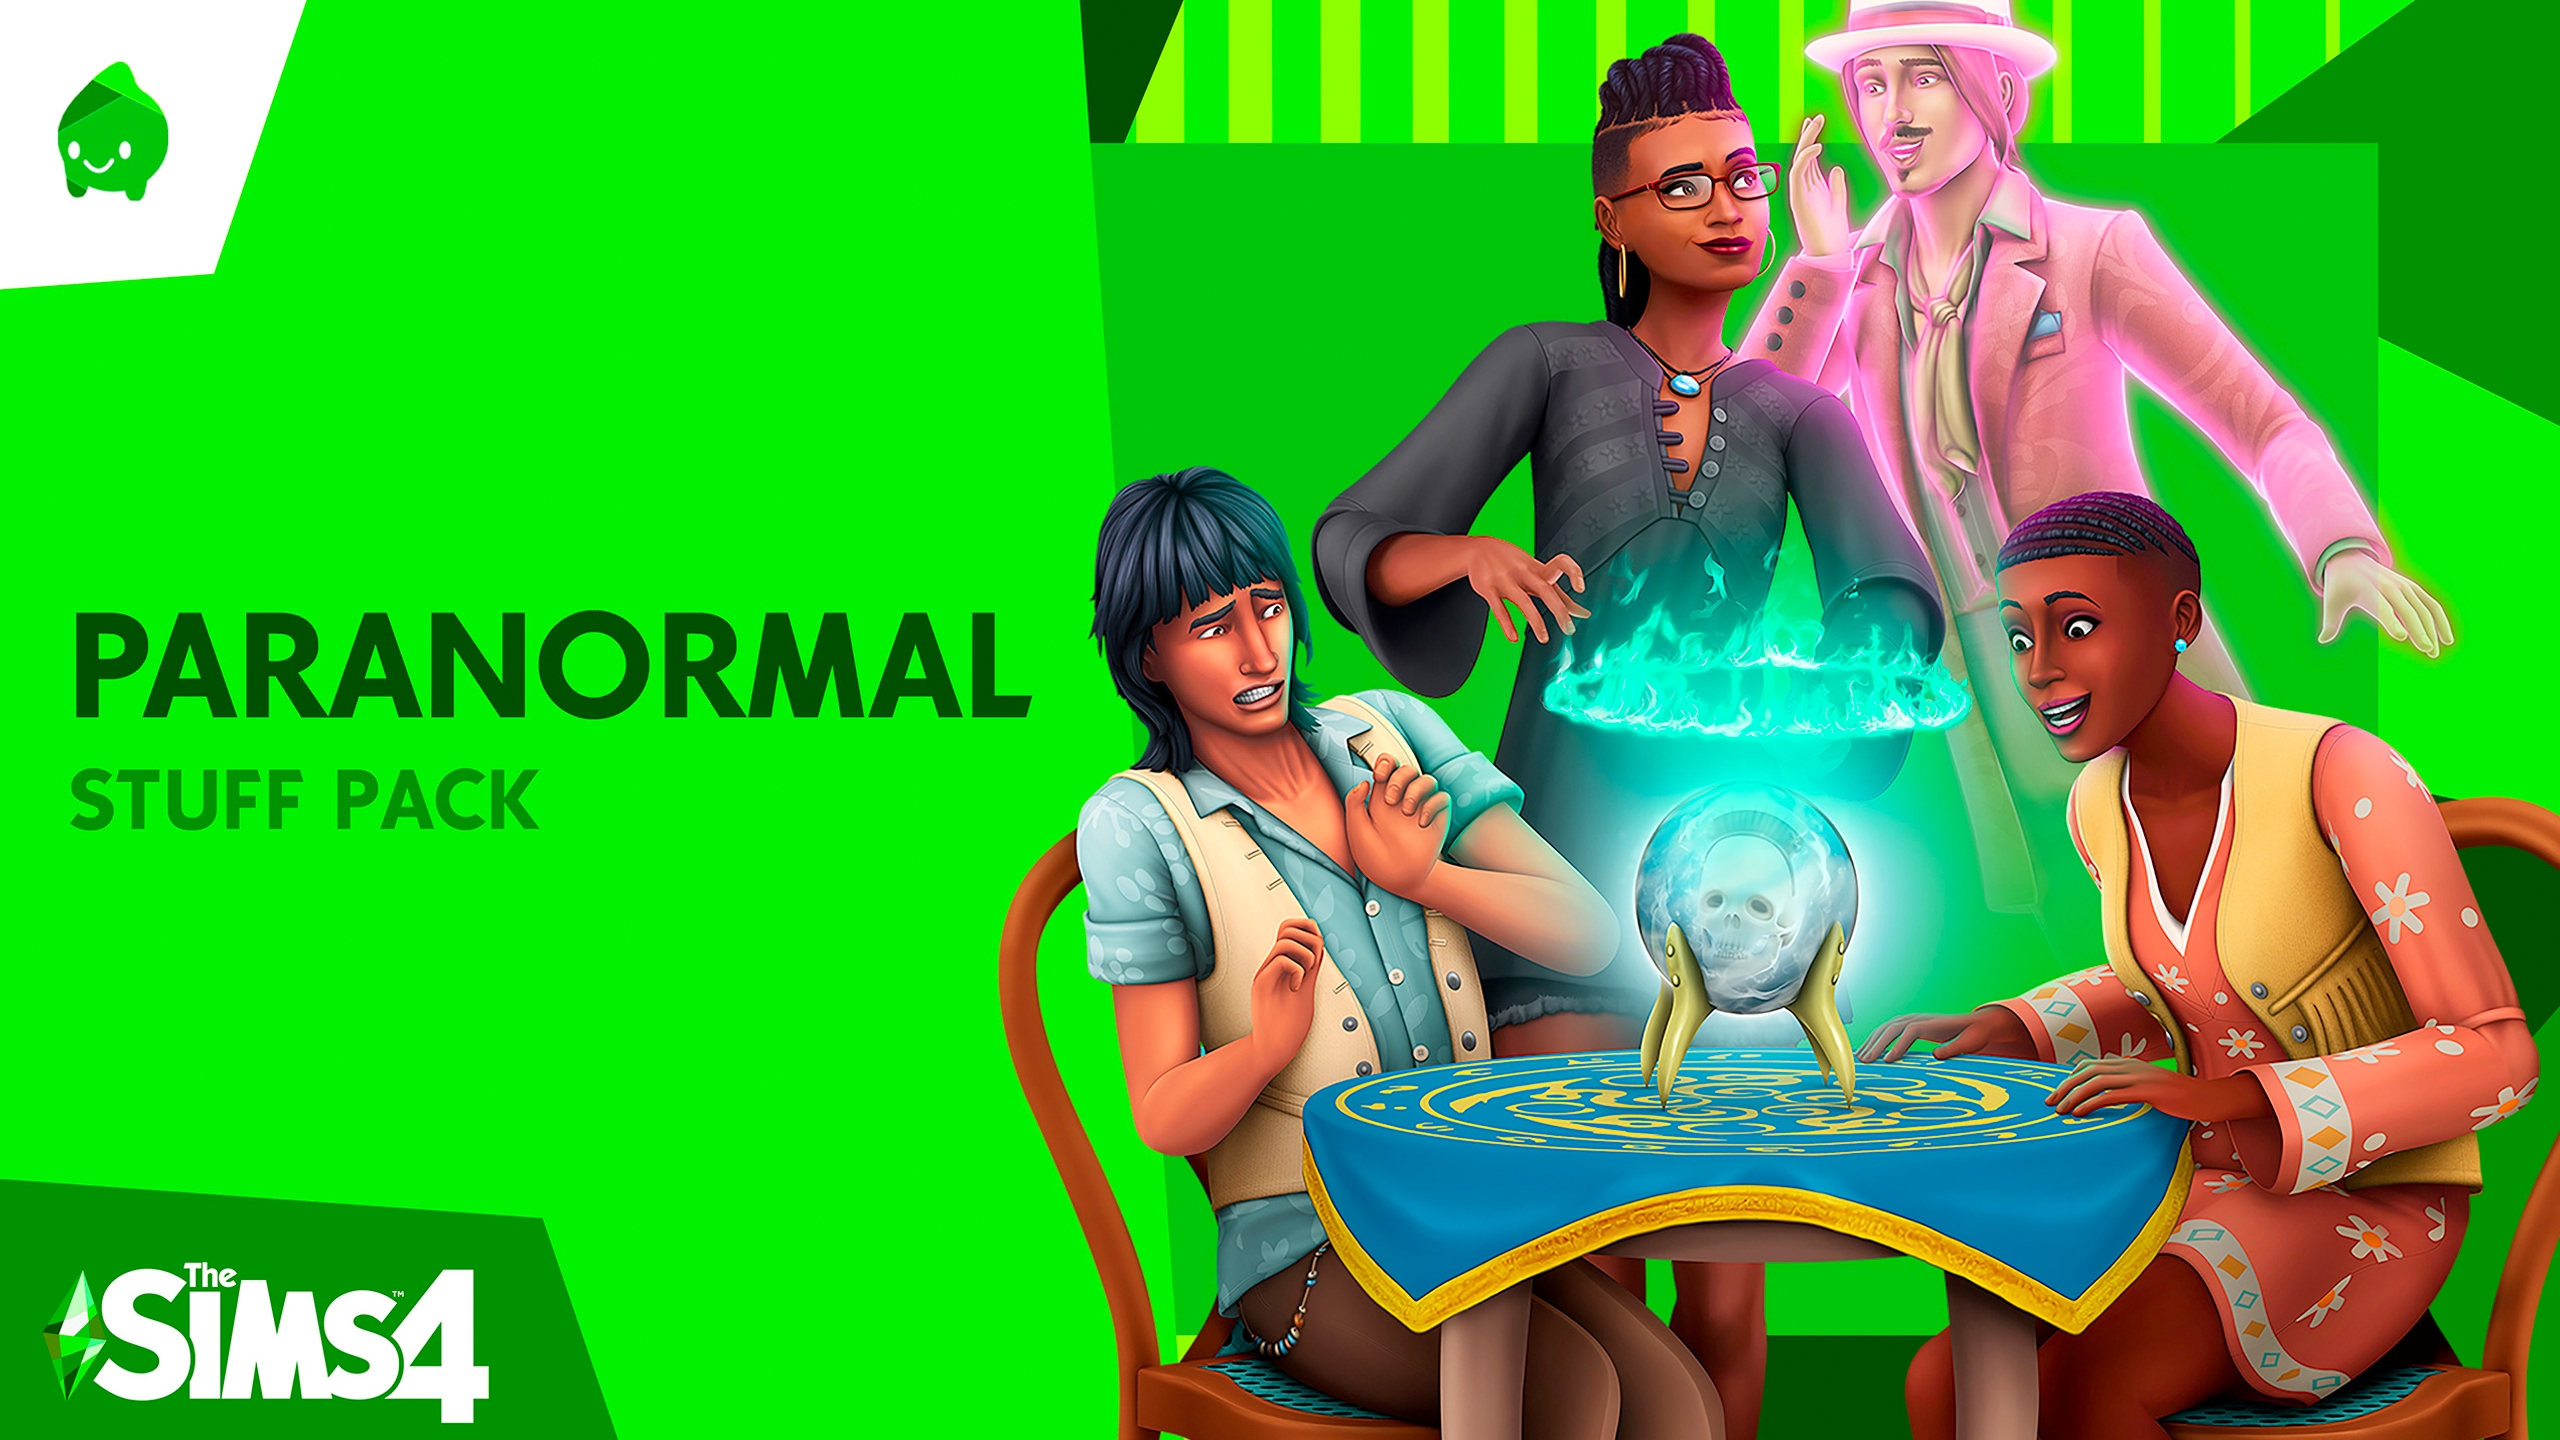 the-sims-4-paranormal-stuff-pack-cover.jpg